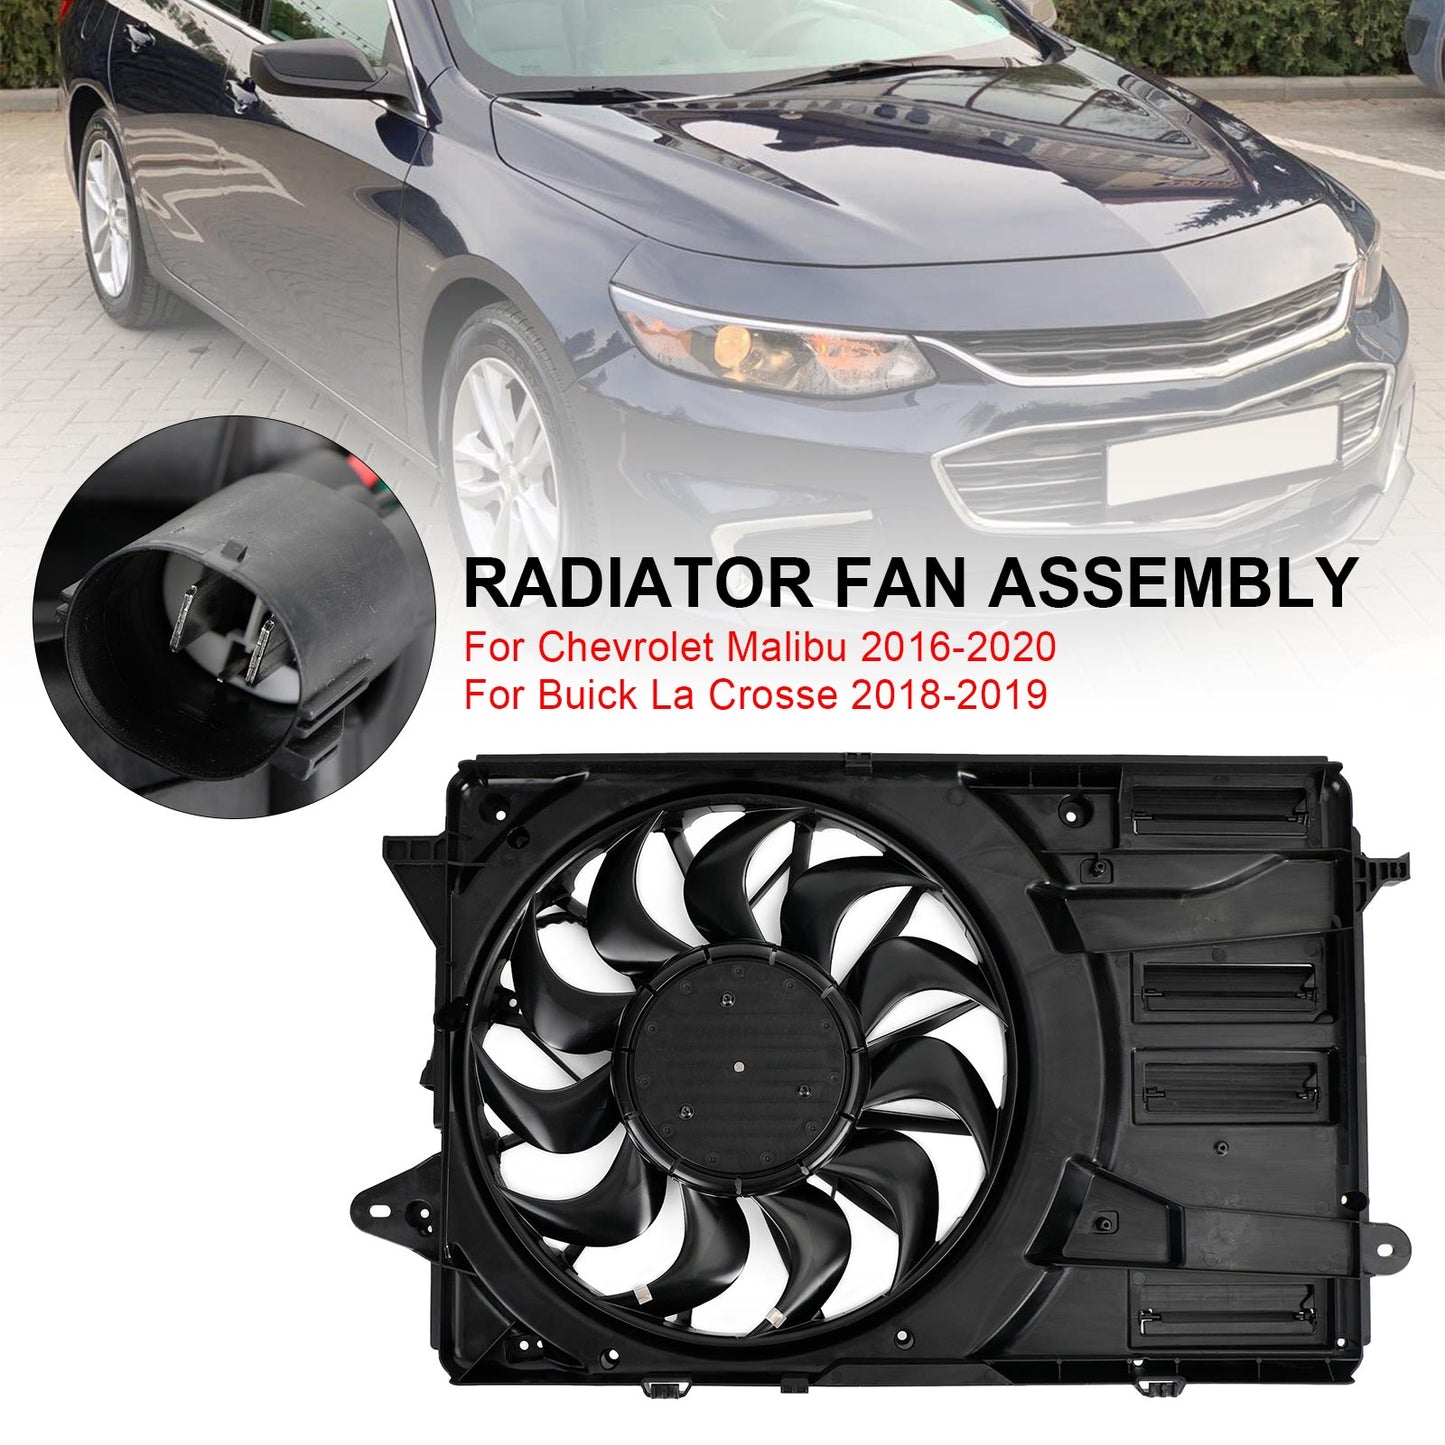 Engine Cooling Fan Assembly Fit Chevy Malibu 2016-2020 Fit Buick LaCrosse 1.5L